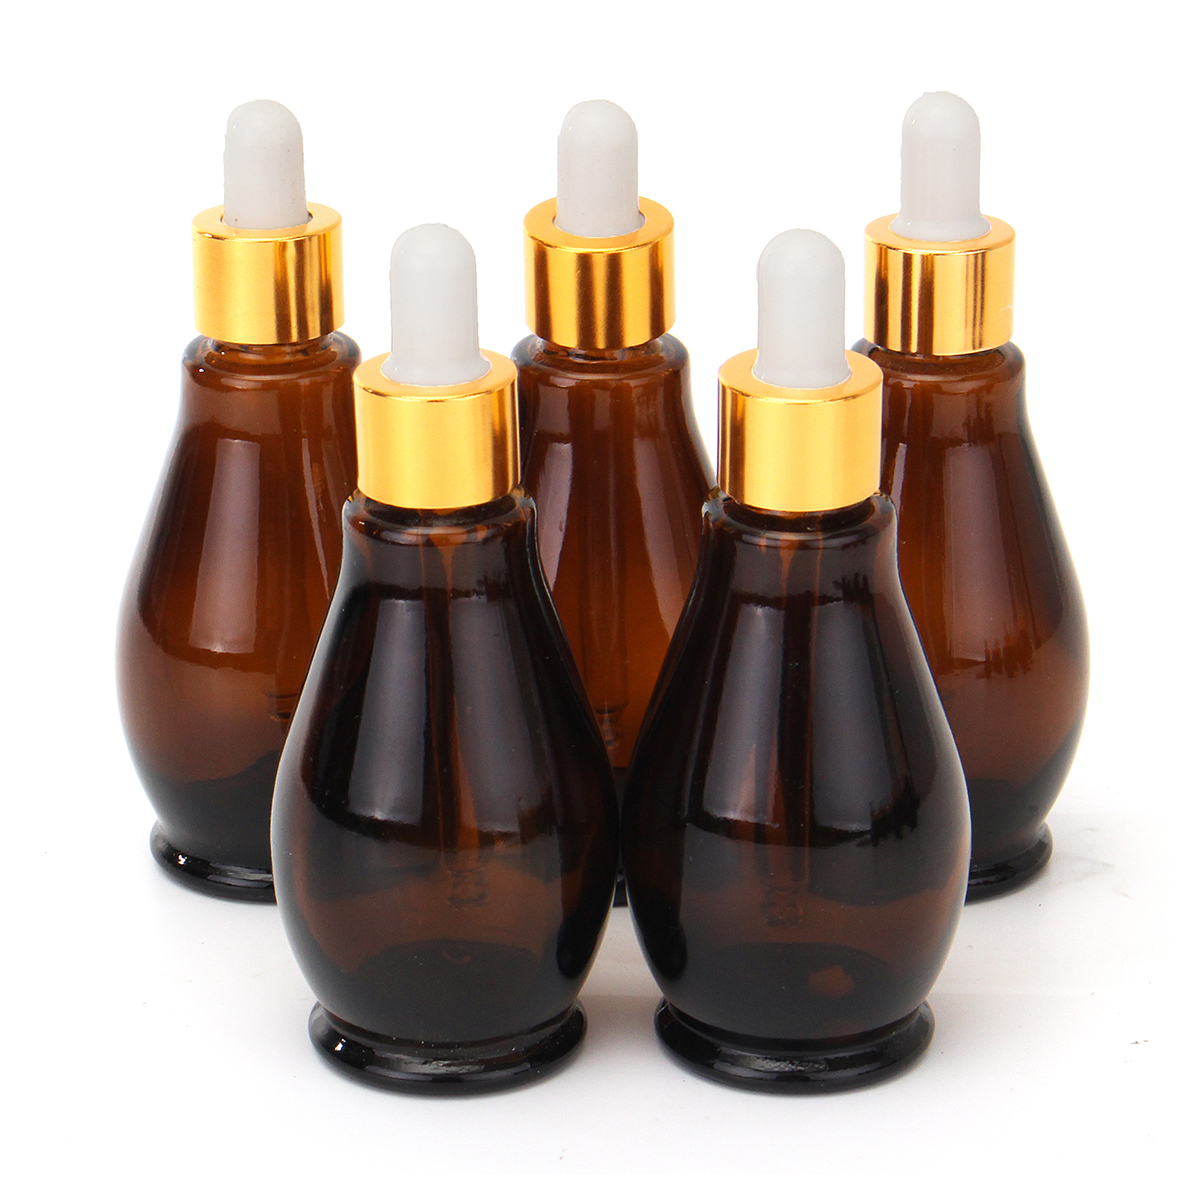 5Pcs-Amber-Glass-Pipette-Eye-Dropper-Bottles-for-Aromatherapy-Essential-Oil-Perfume-Toner-1276237-4